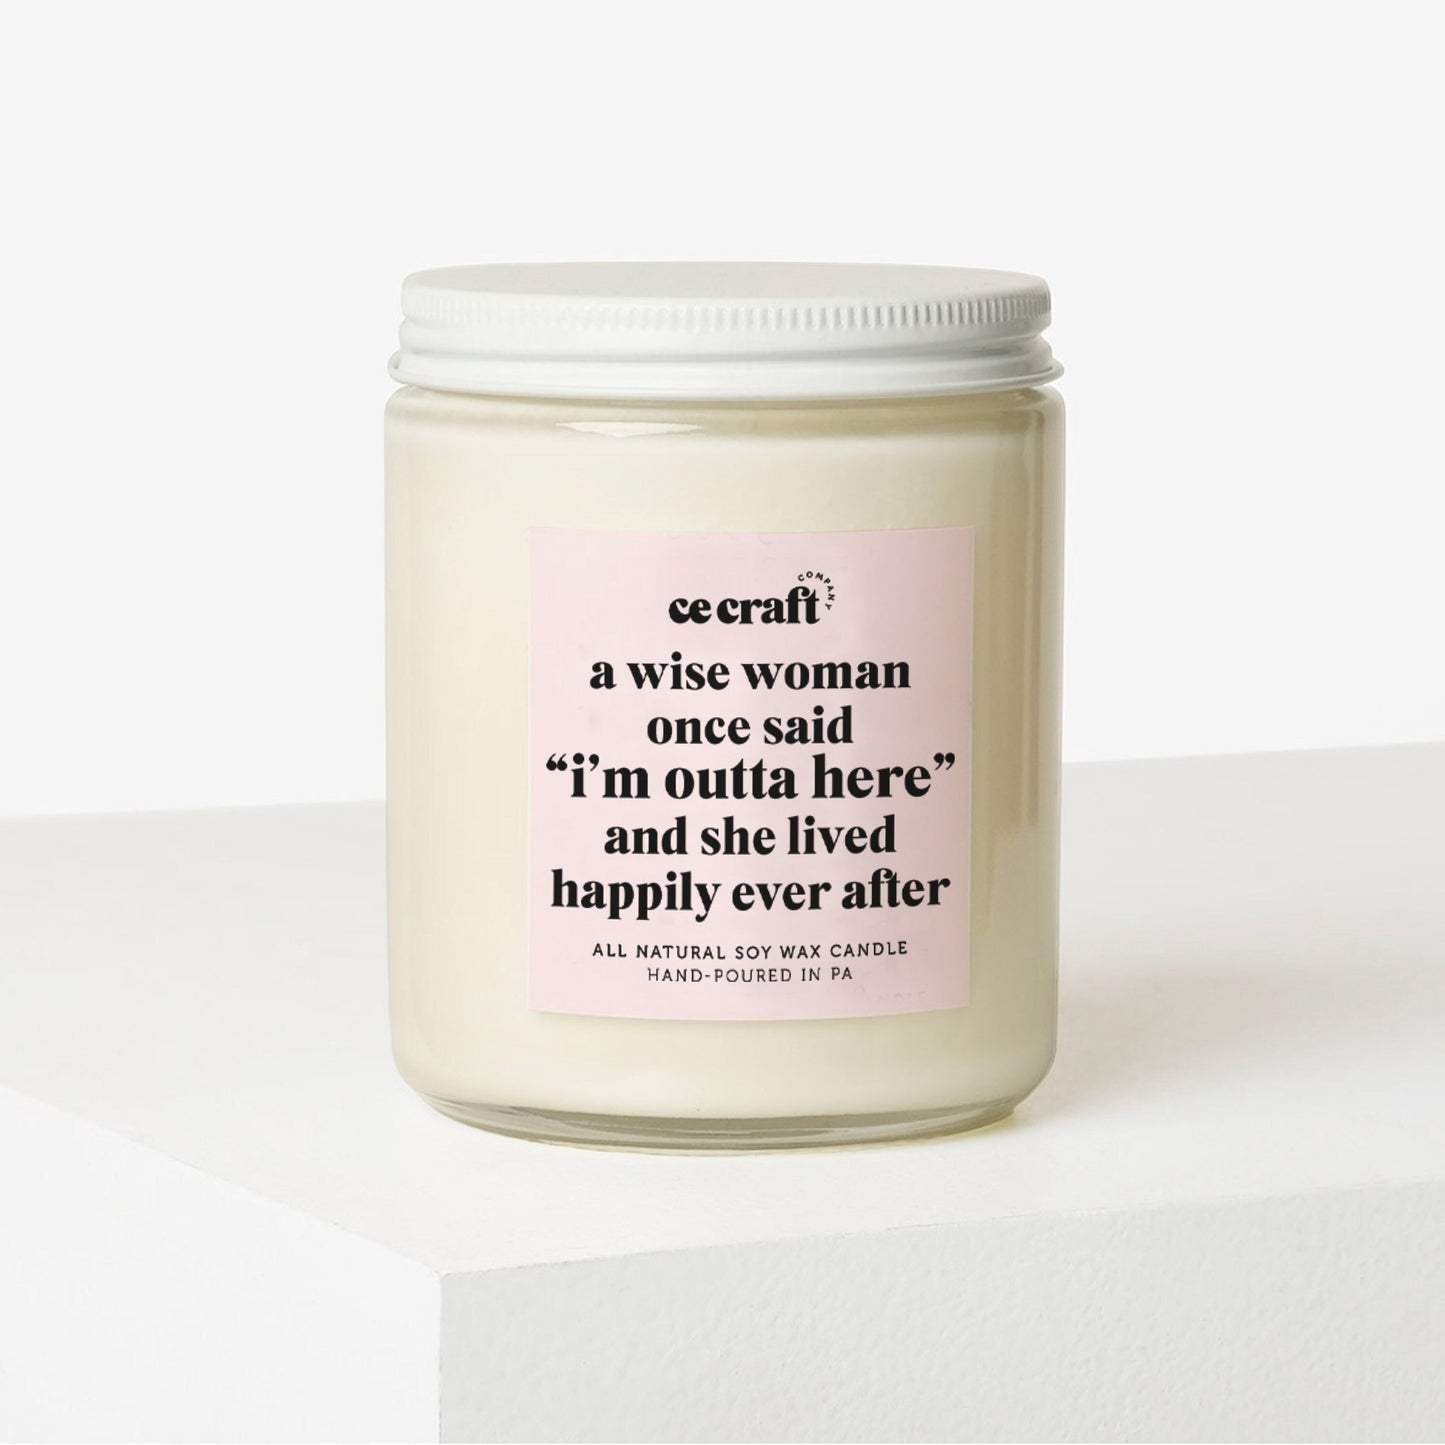 A Wise Woman Once Said "I'm Outta Here" Candle Candle CE Craft 